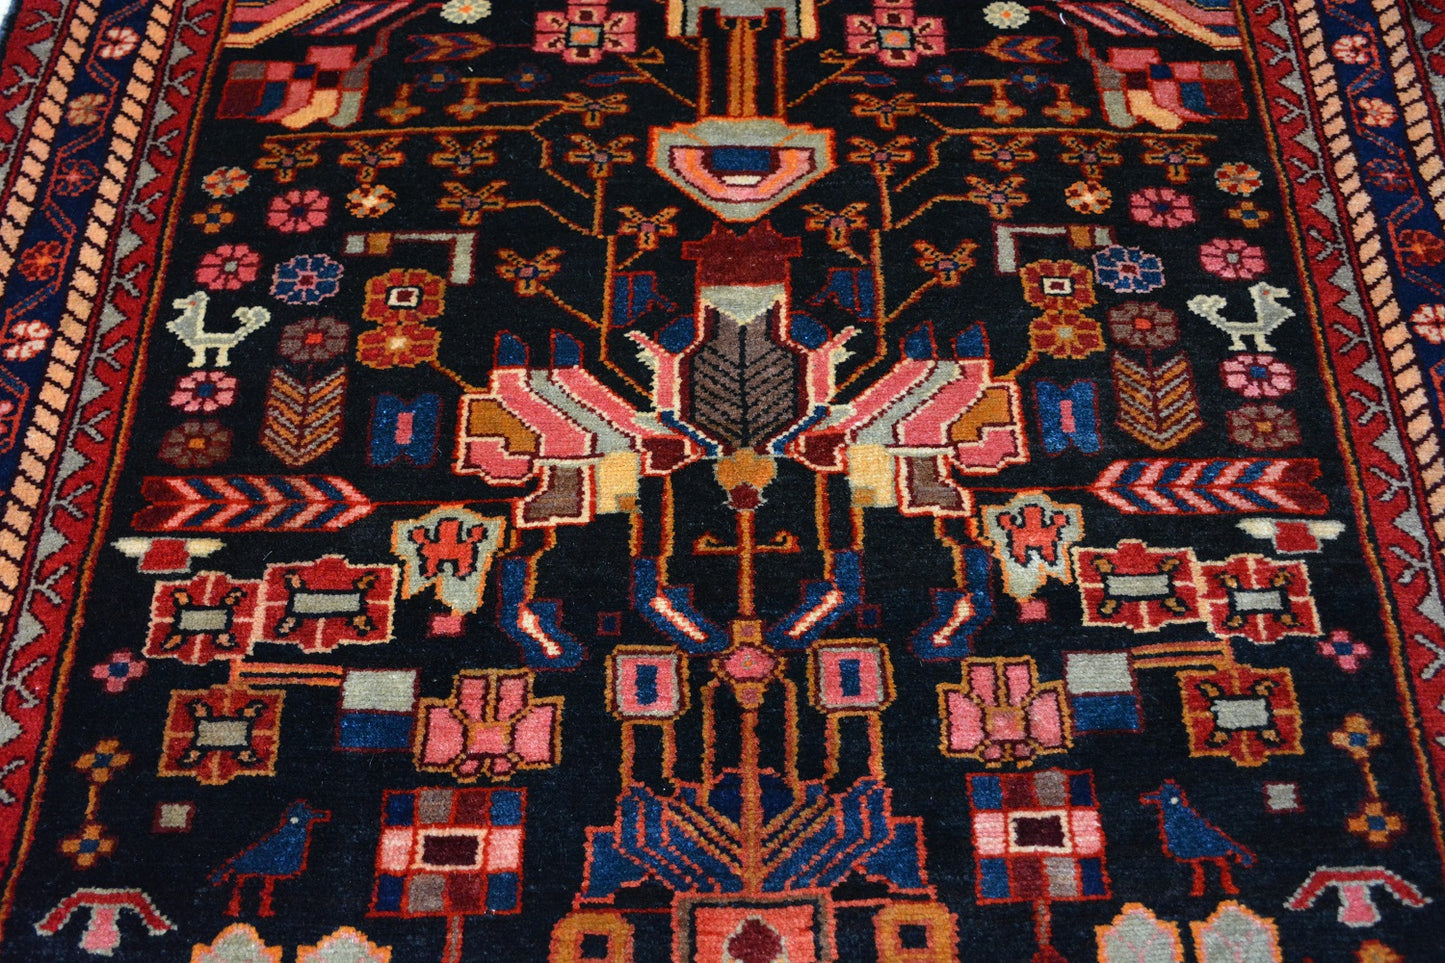 A brand new Persian village carpet from the Hamadan district